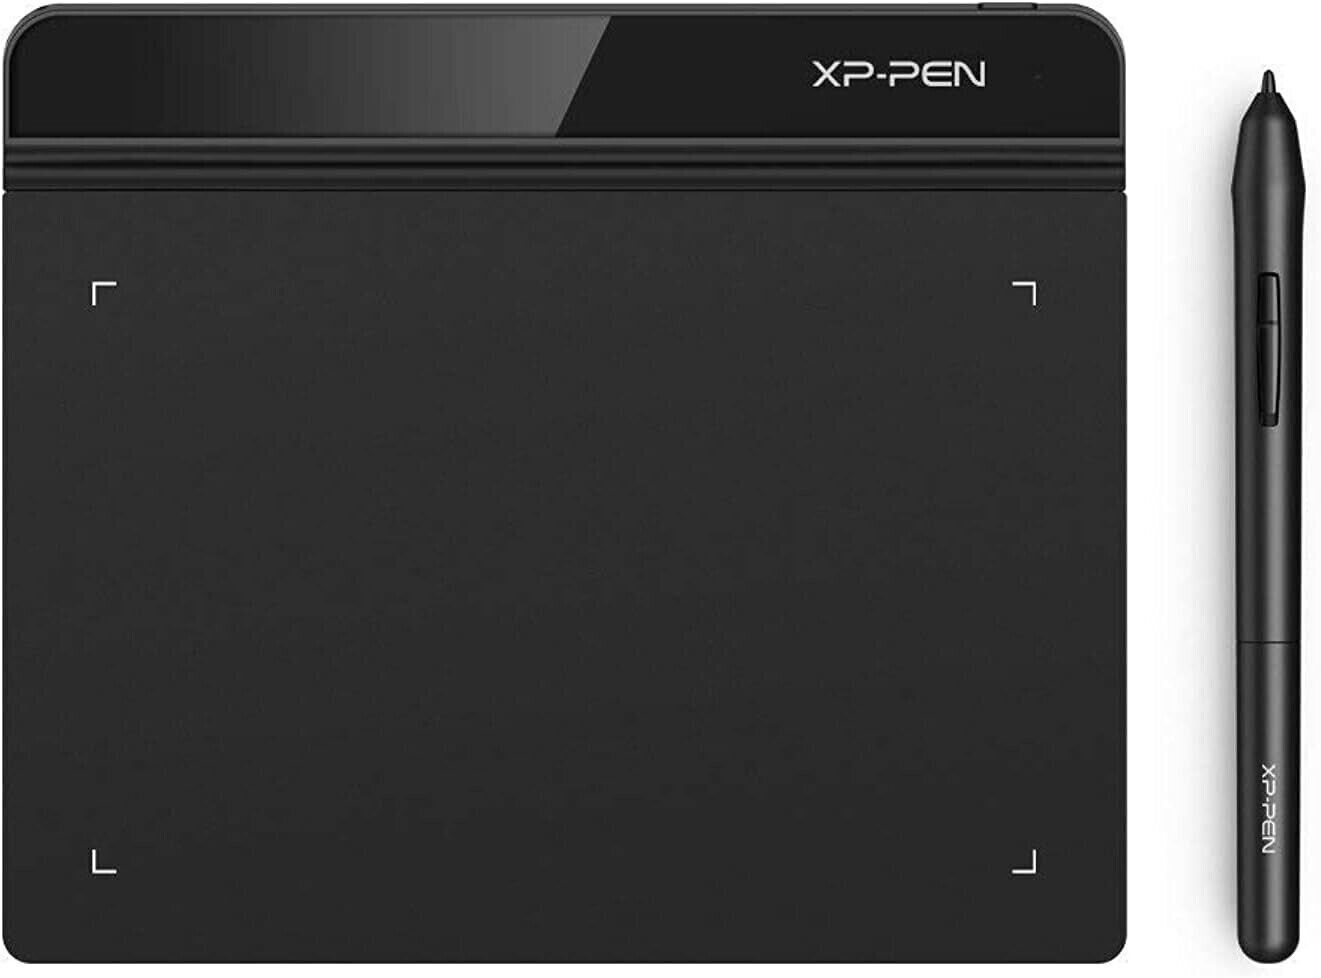 XP Pen Star G640 Digital Graphic Drawing Tablet Battery Free Pen for Mac Windows